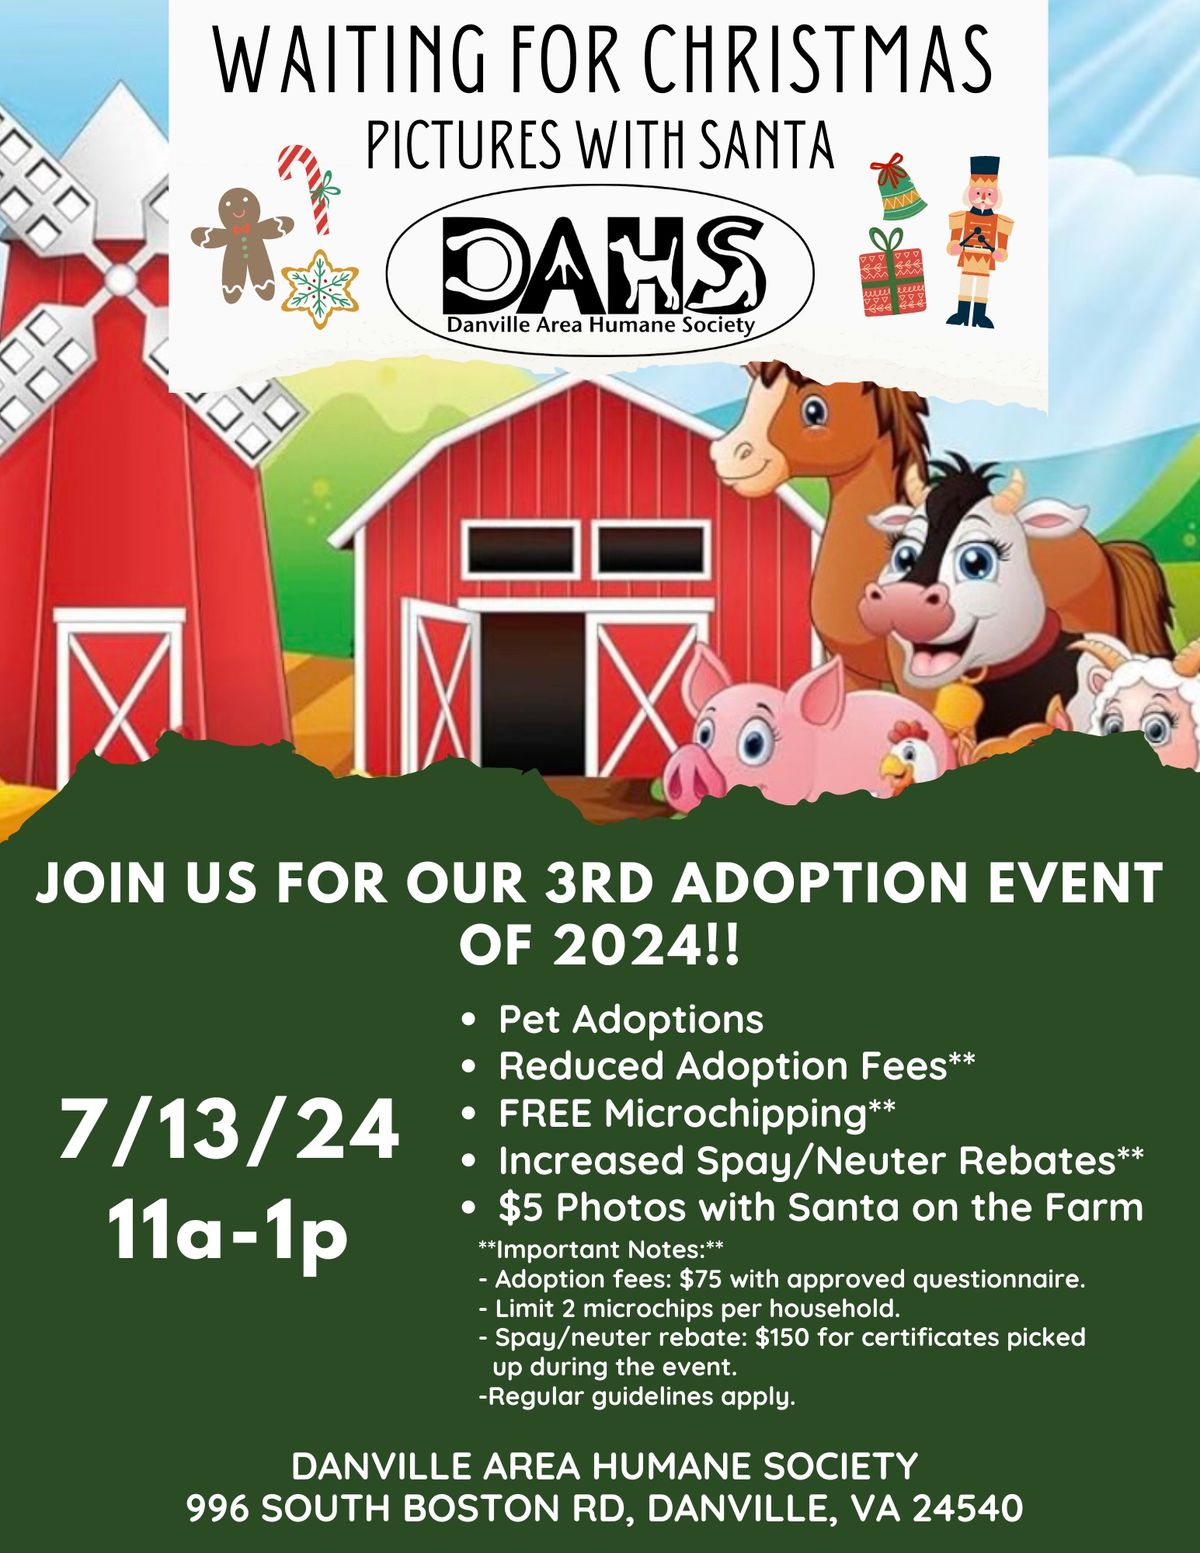 3rd Adoption Event of 2024! Barnyard Pictures with Santa